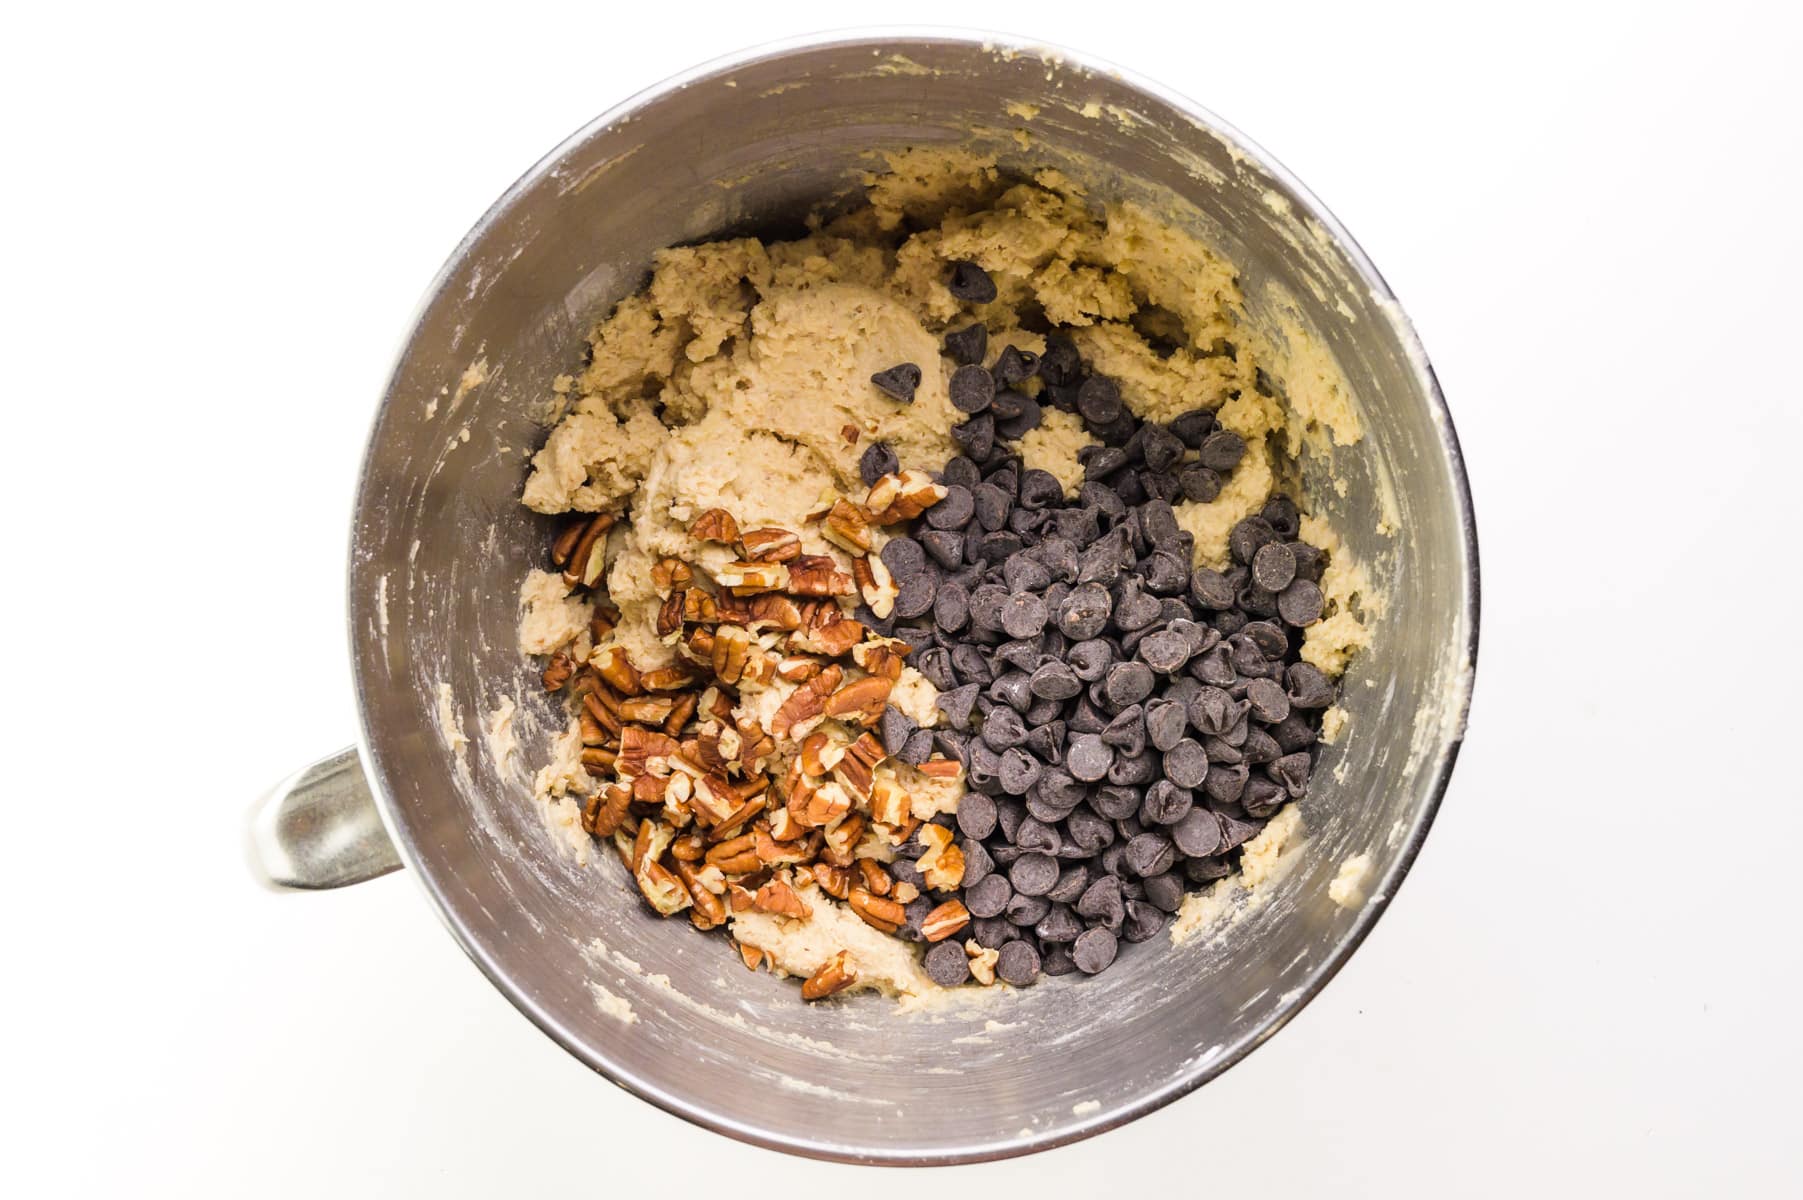 Looking down on a mixing bowl with cookie dough, chocolate chips, and chopped pecans.